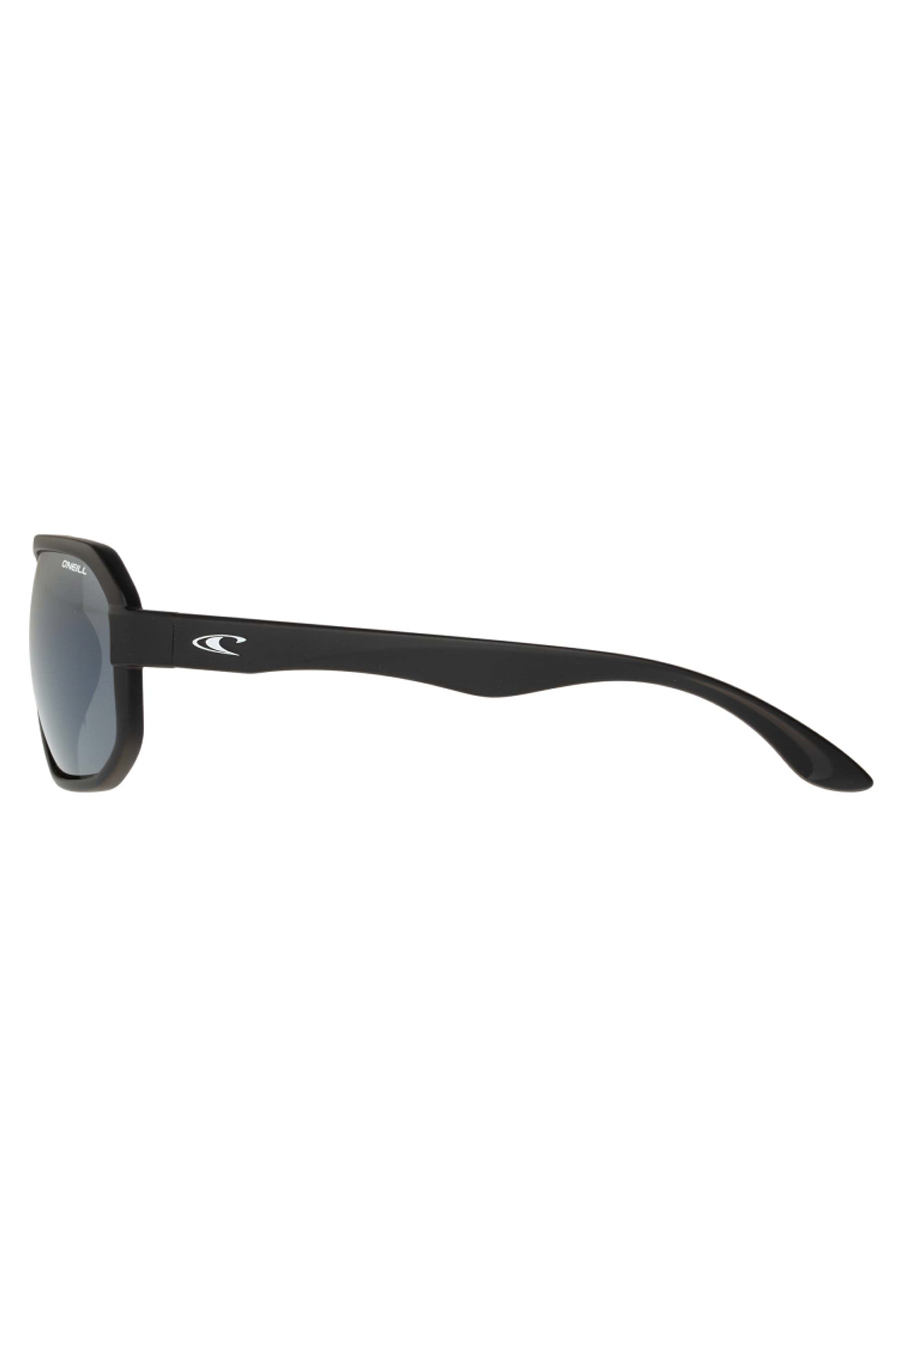 Saulesbrilles ONEILL ONS-9028-20-104P